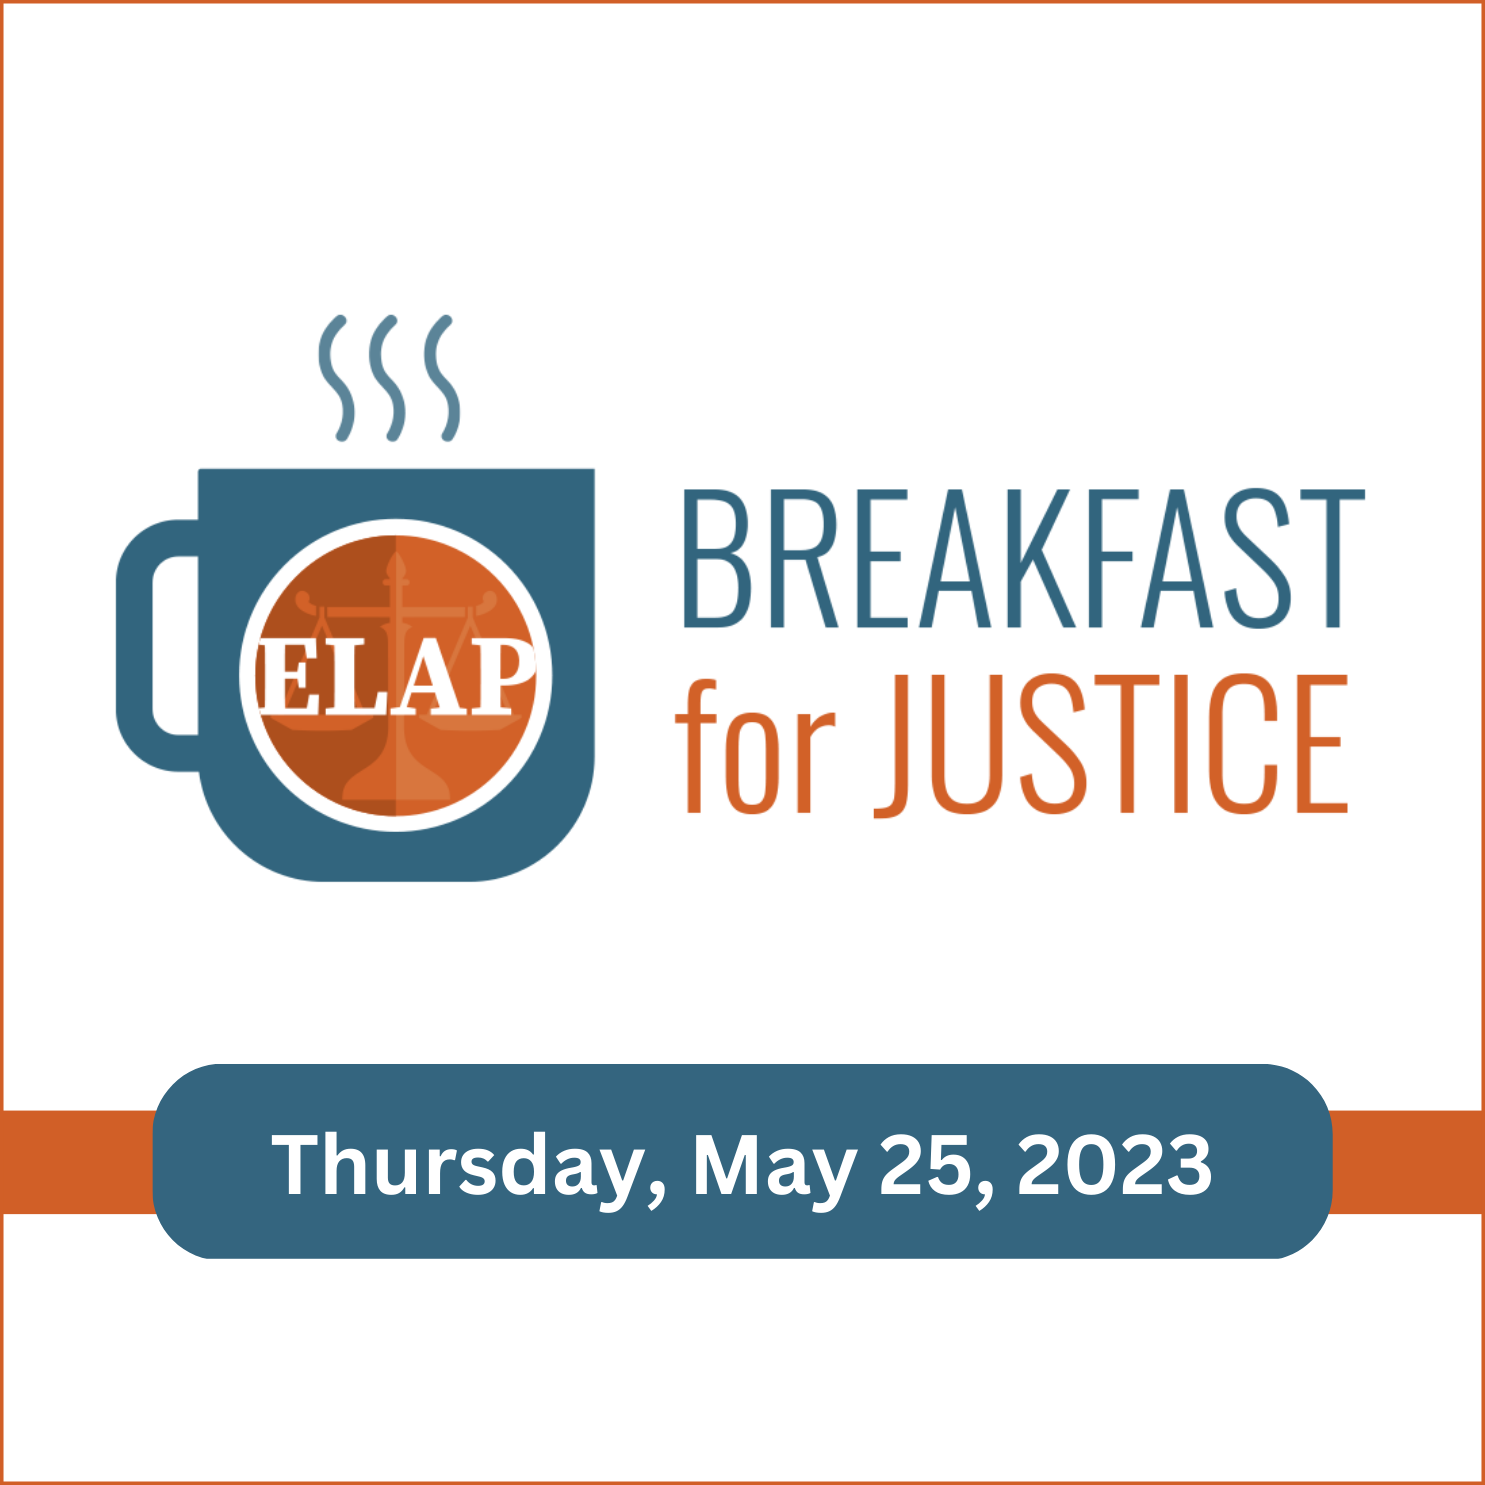 Breakfast for Justice Thursday, May 25, 2023